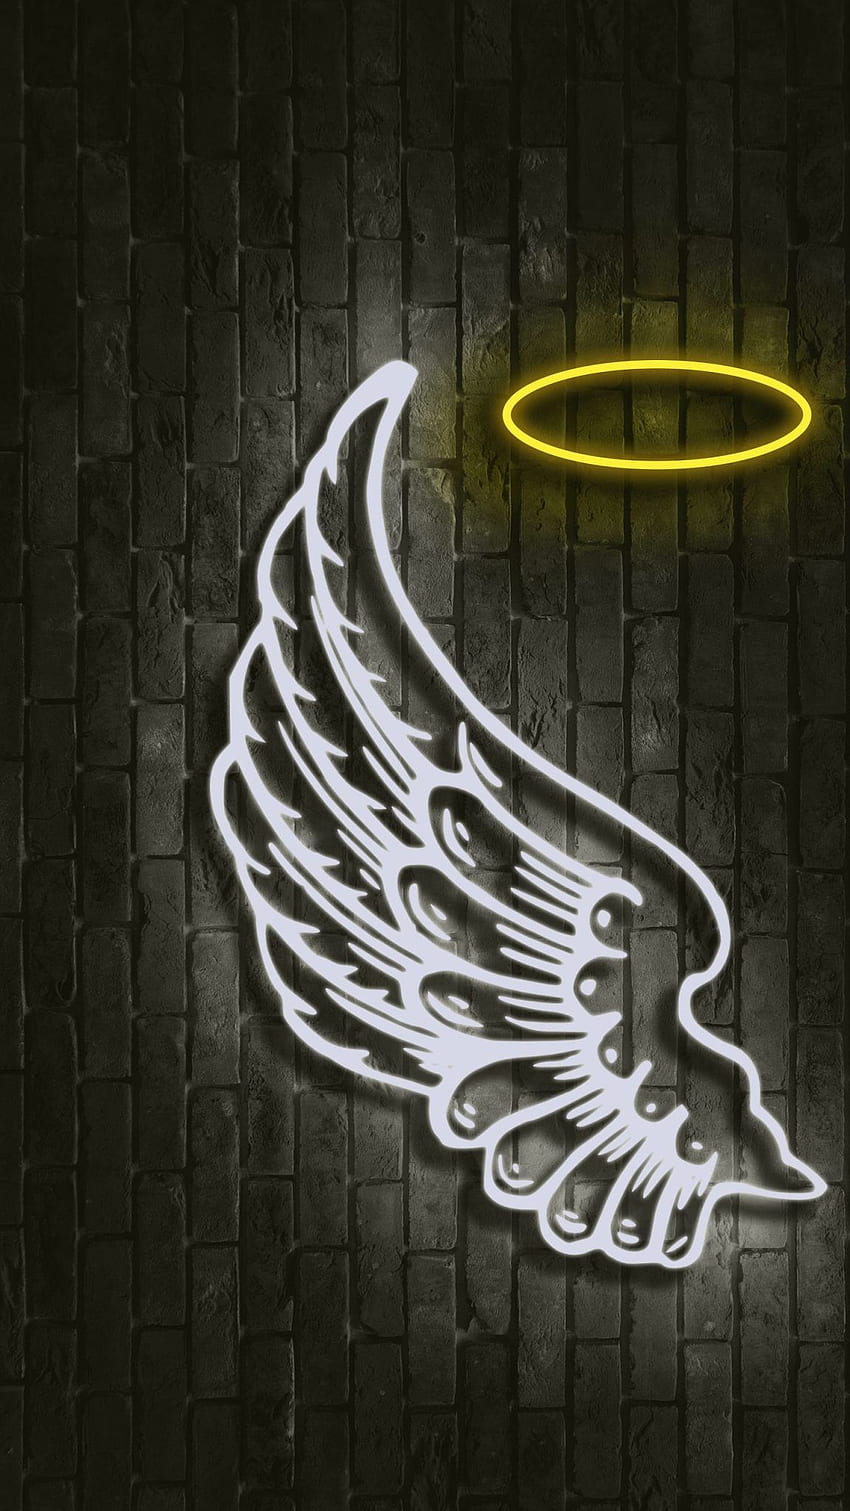 Angel wing neon sign on a brick wall - Wings